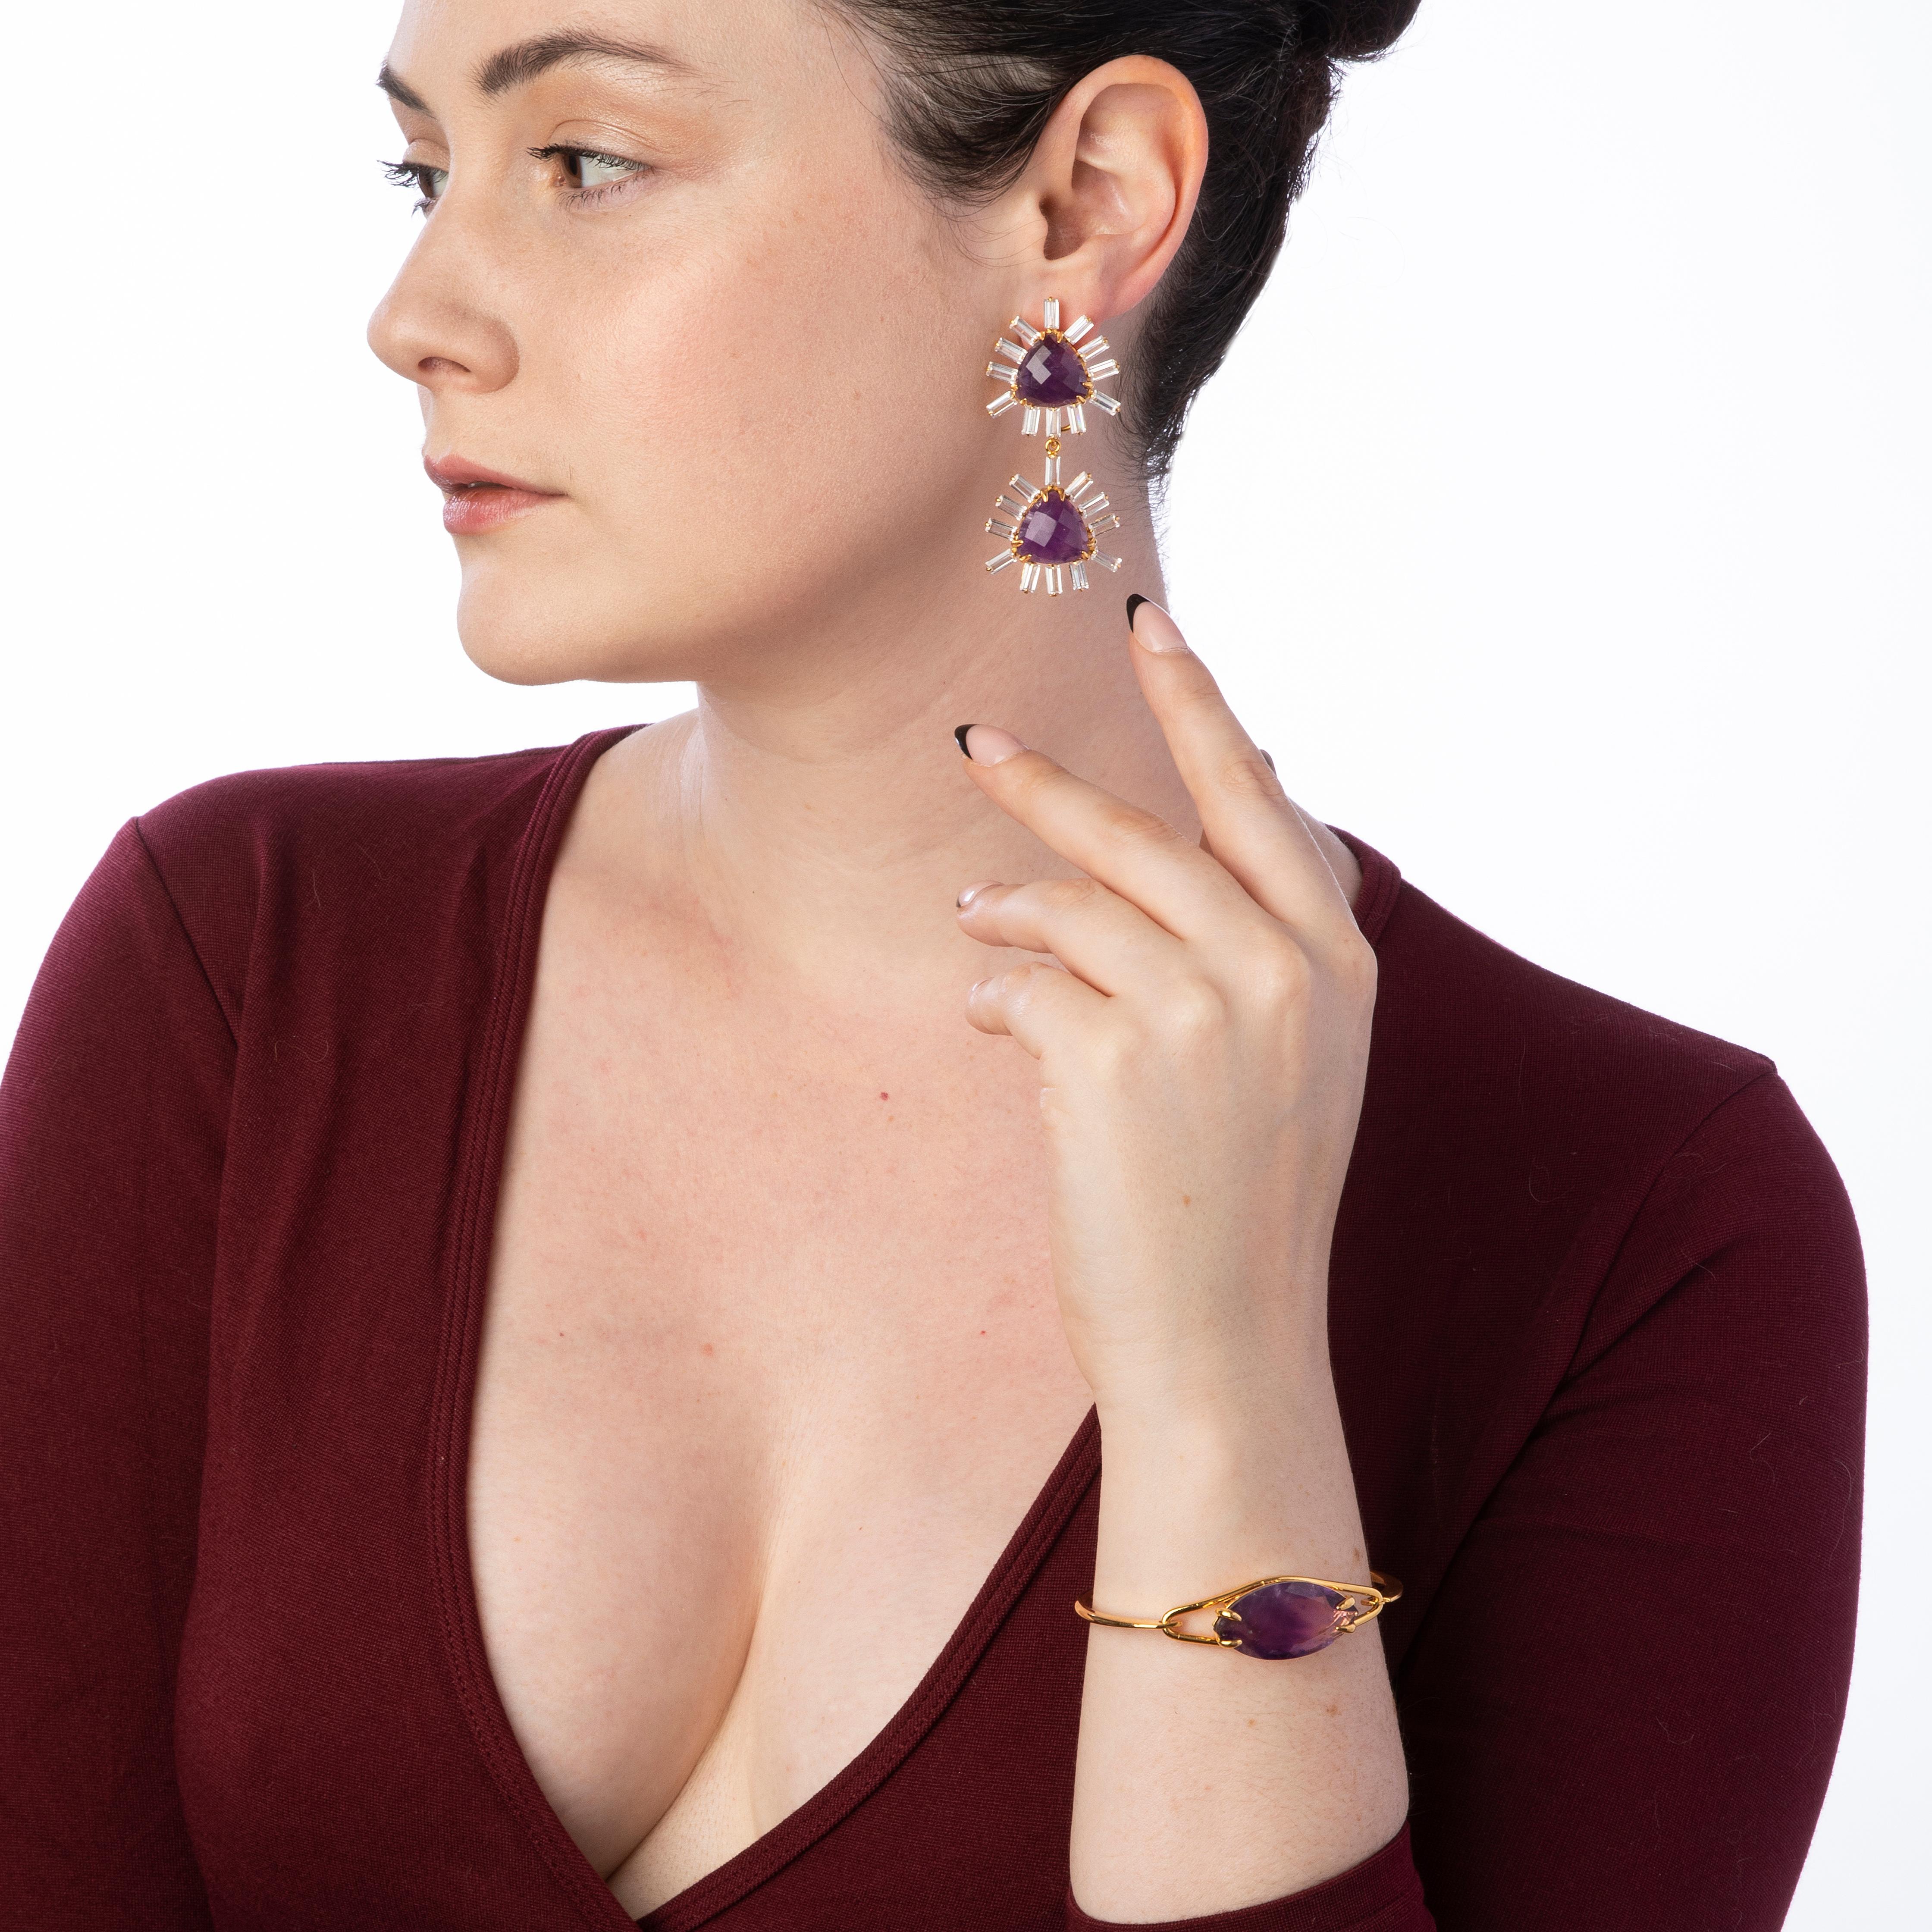 These statement earrings feature faceted triangle-shaped semi-precious stones and clear quartz baguettes, meticulously handcrafted in 14K gold-plated settings. These exquisite dangle earrings offer a burst of vibrant colors, and their detachable